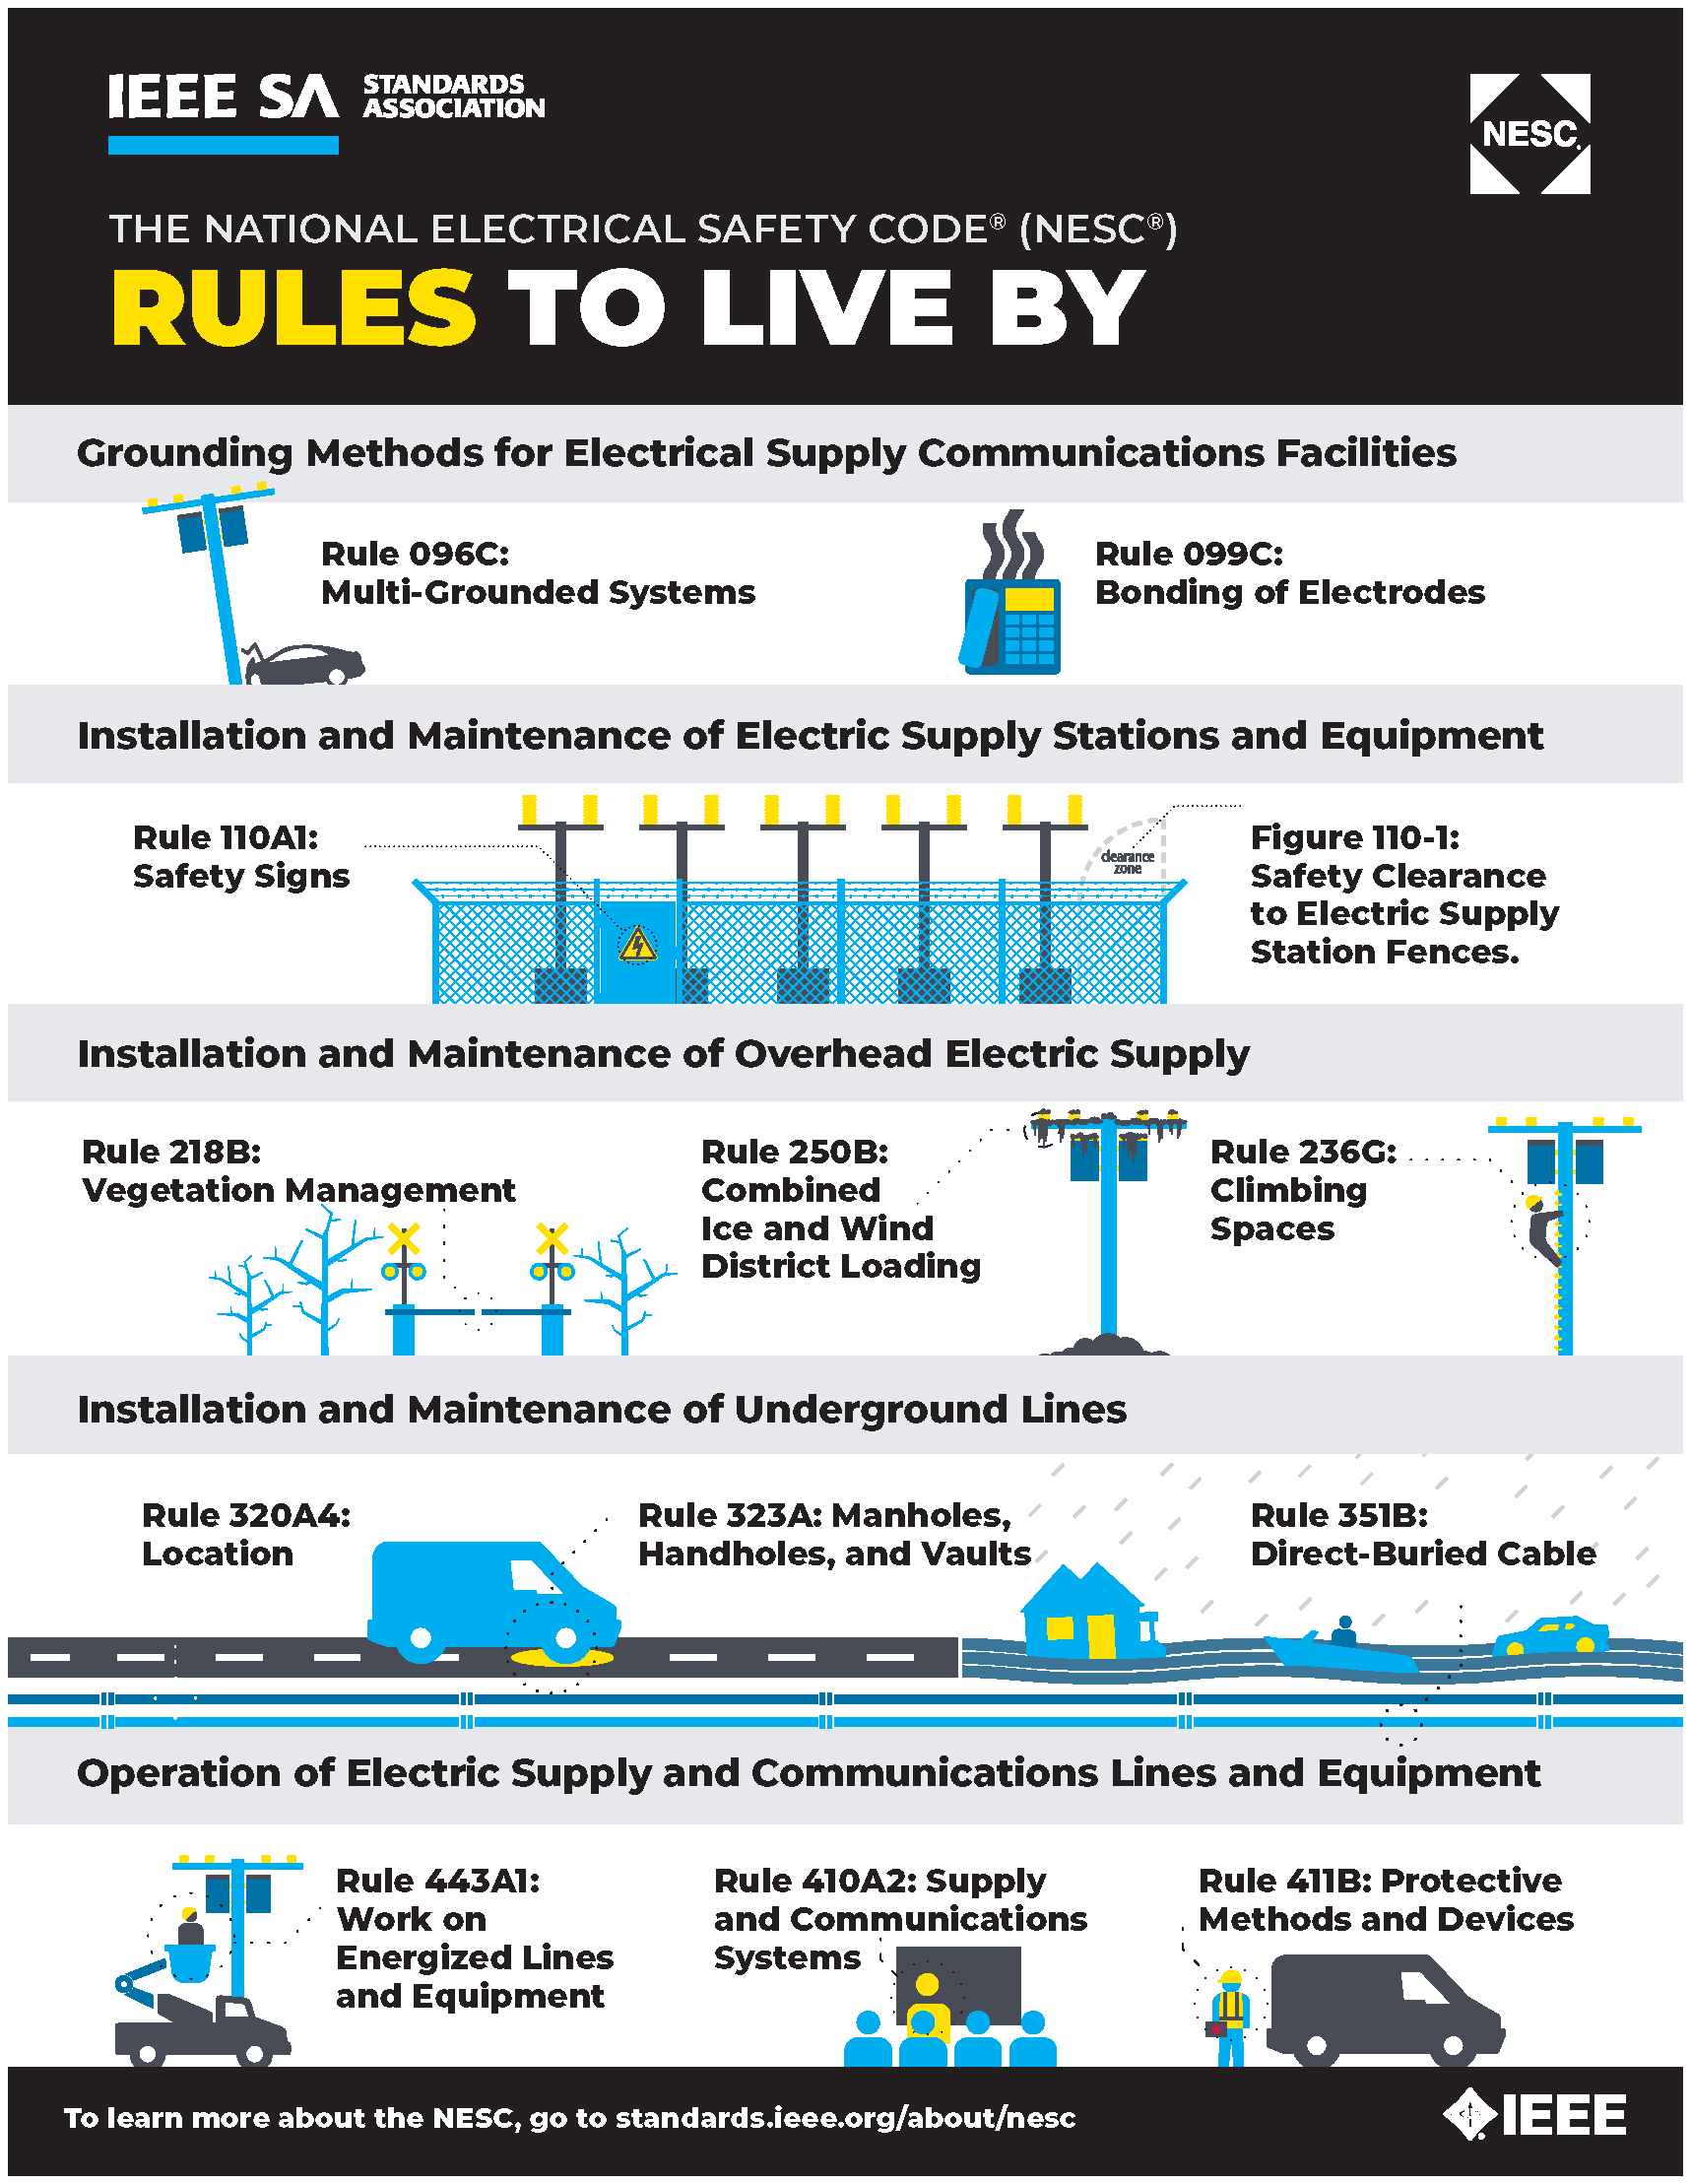 NESC infographic "Rules to Live By"